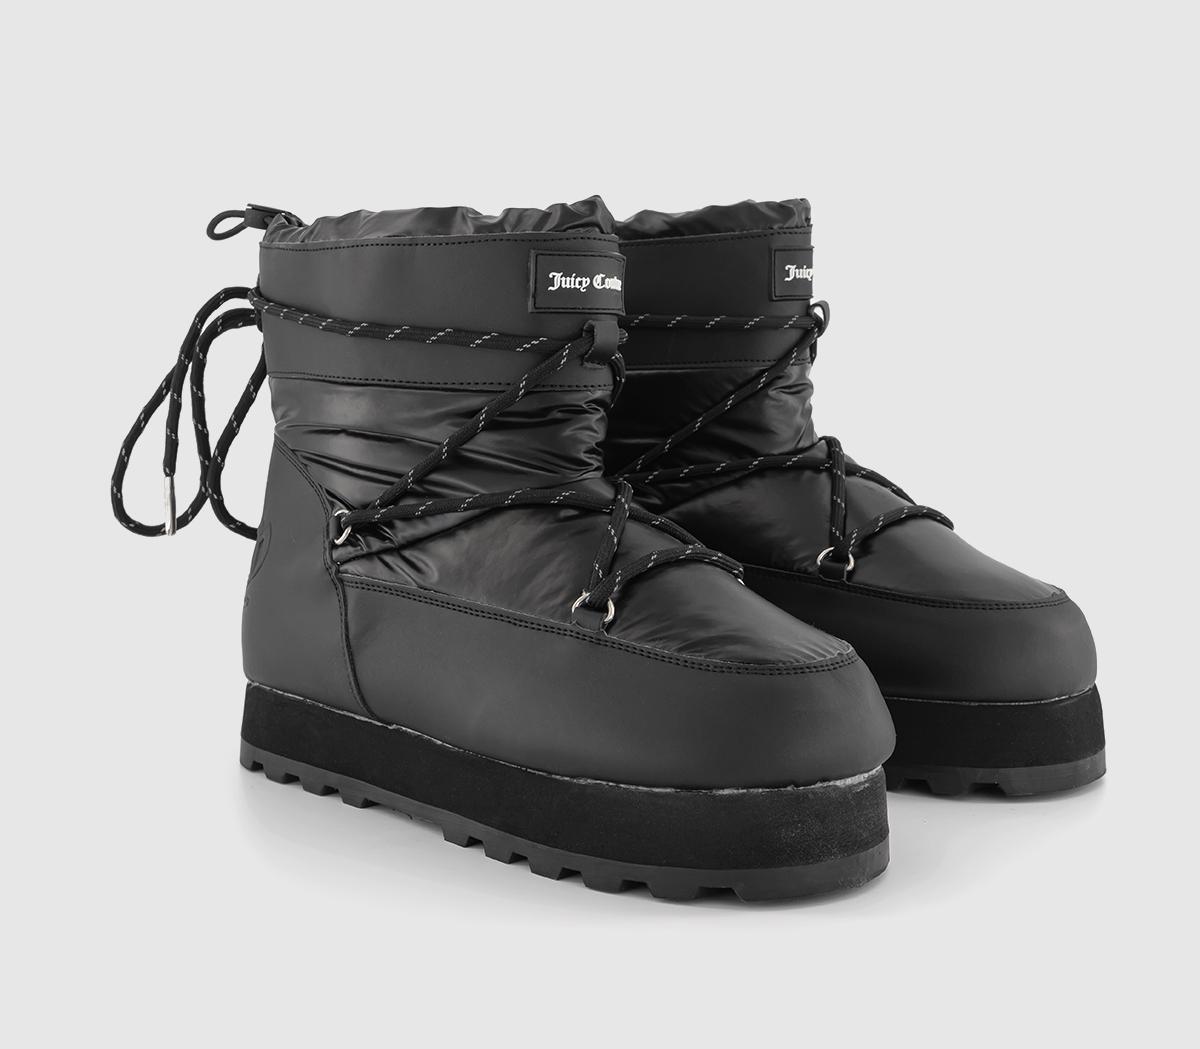 Juicy Couture Womens Mars Boots Black, 6